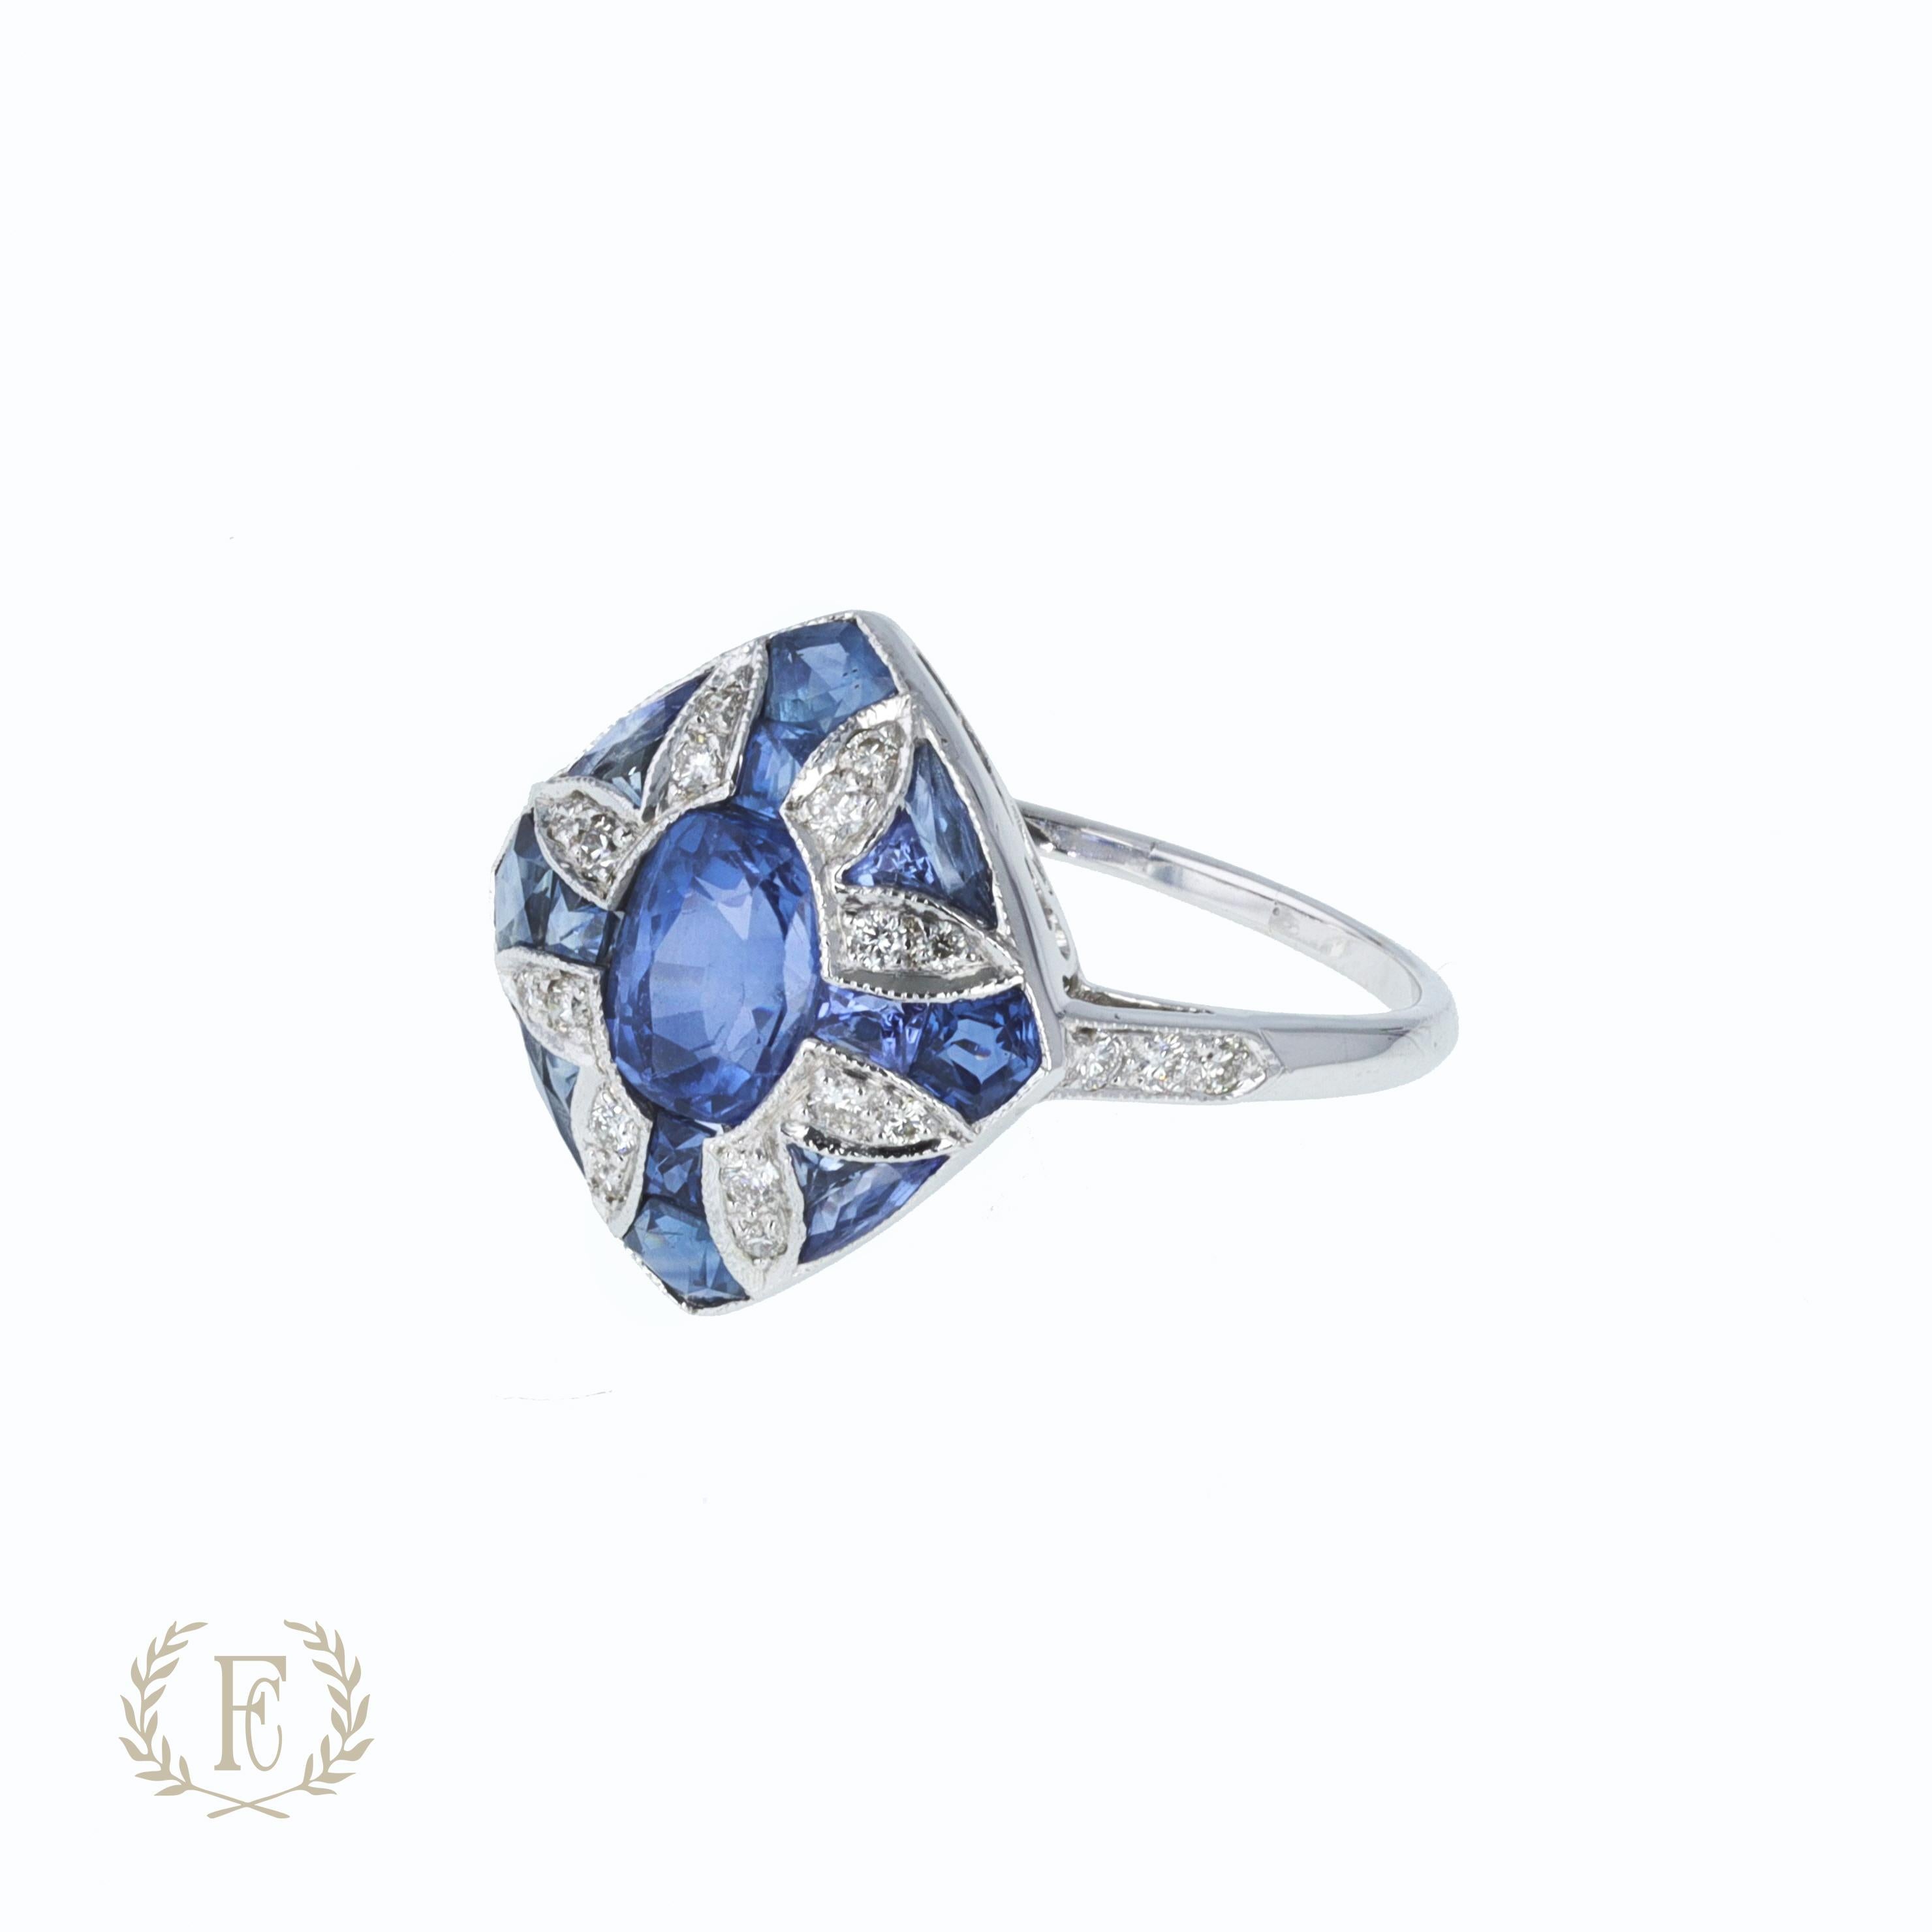 One platinum aquamarine and diamond ring containing one cushion aquamarine weighing 2.18 ctw, 6 baguette diamonds weighing 0.18 ctw, and 4 cabochon blue sapphires, sized to 4.25.